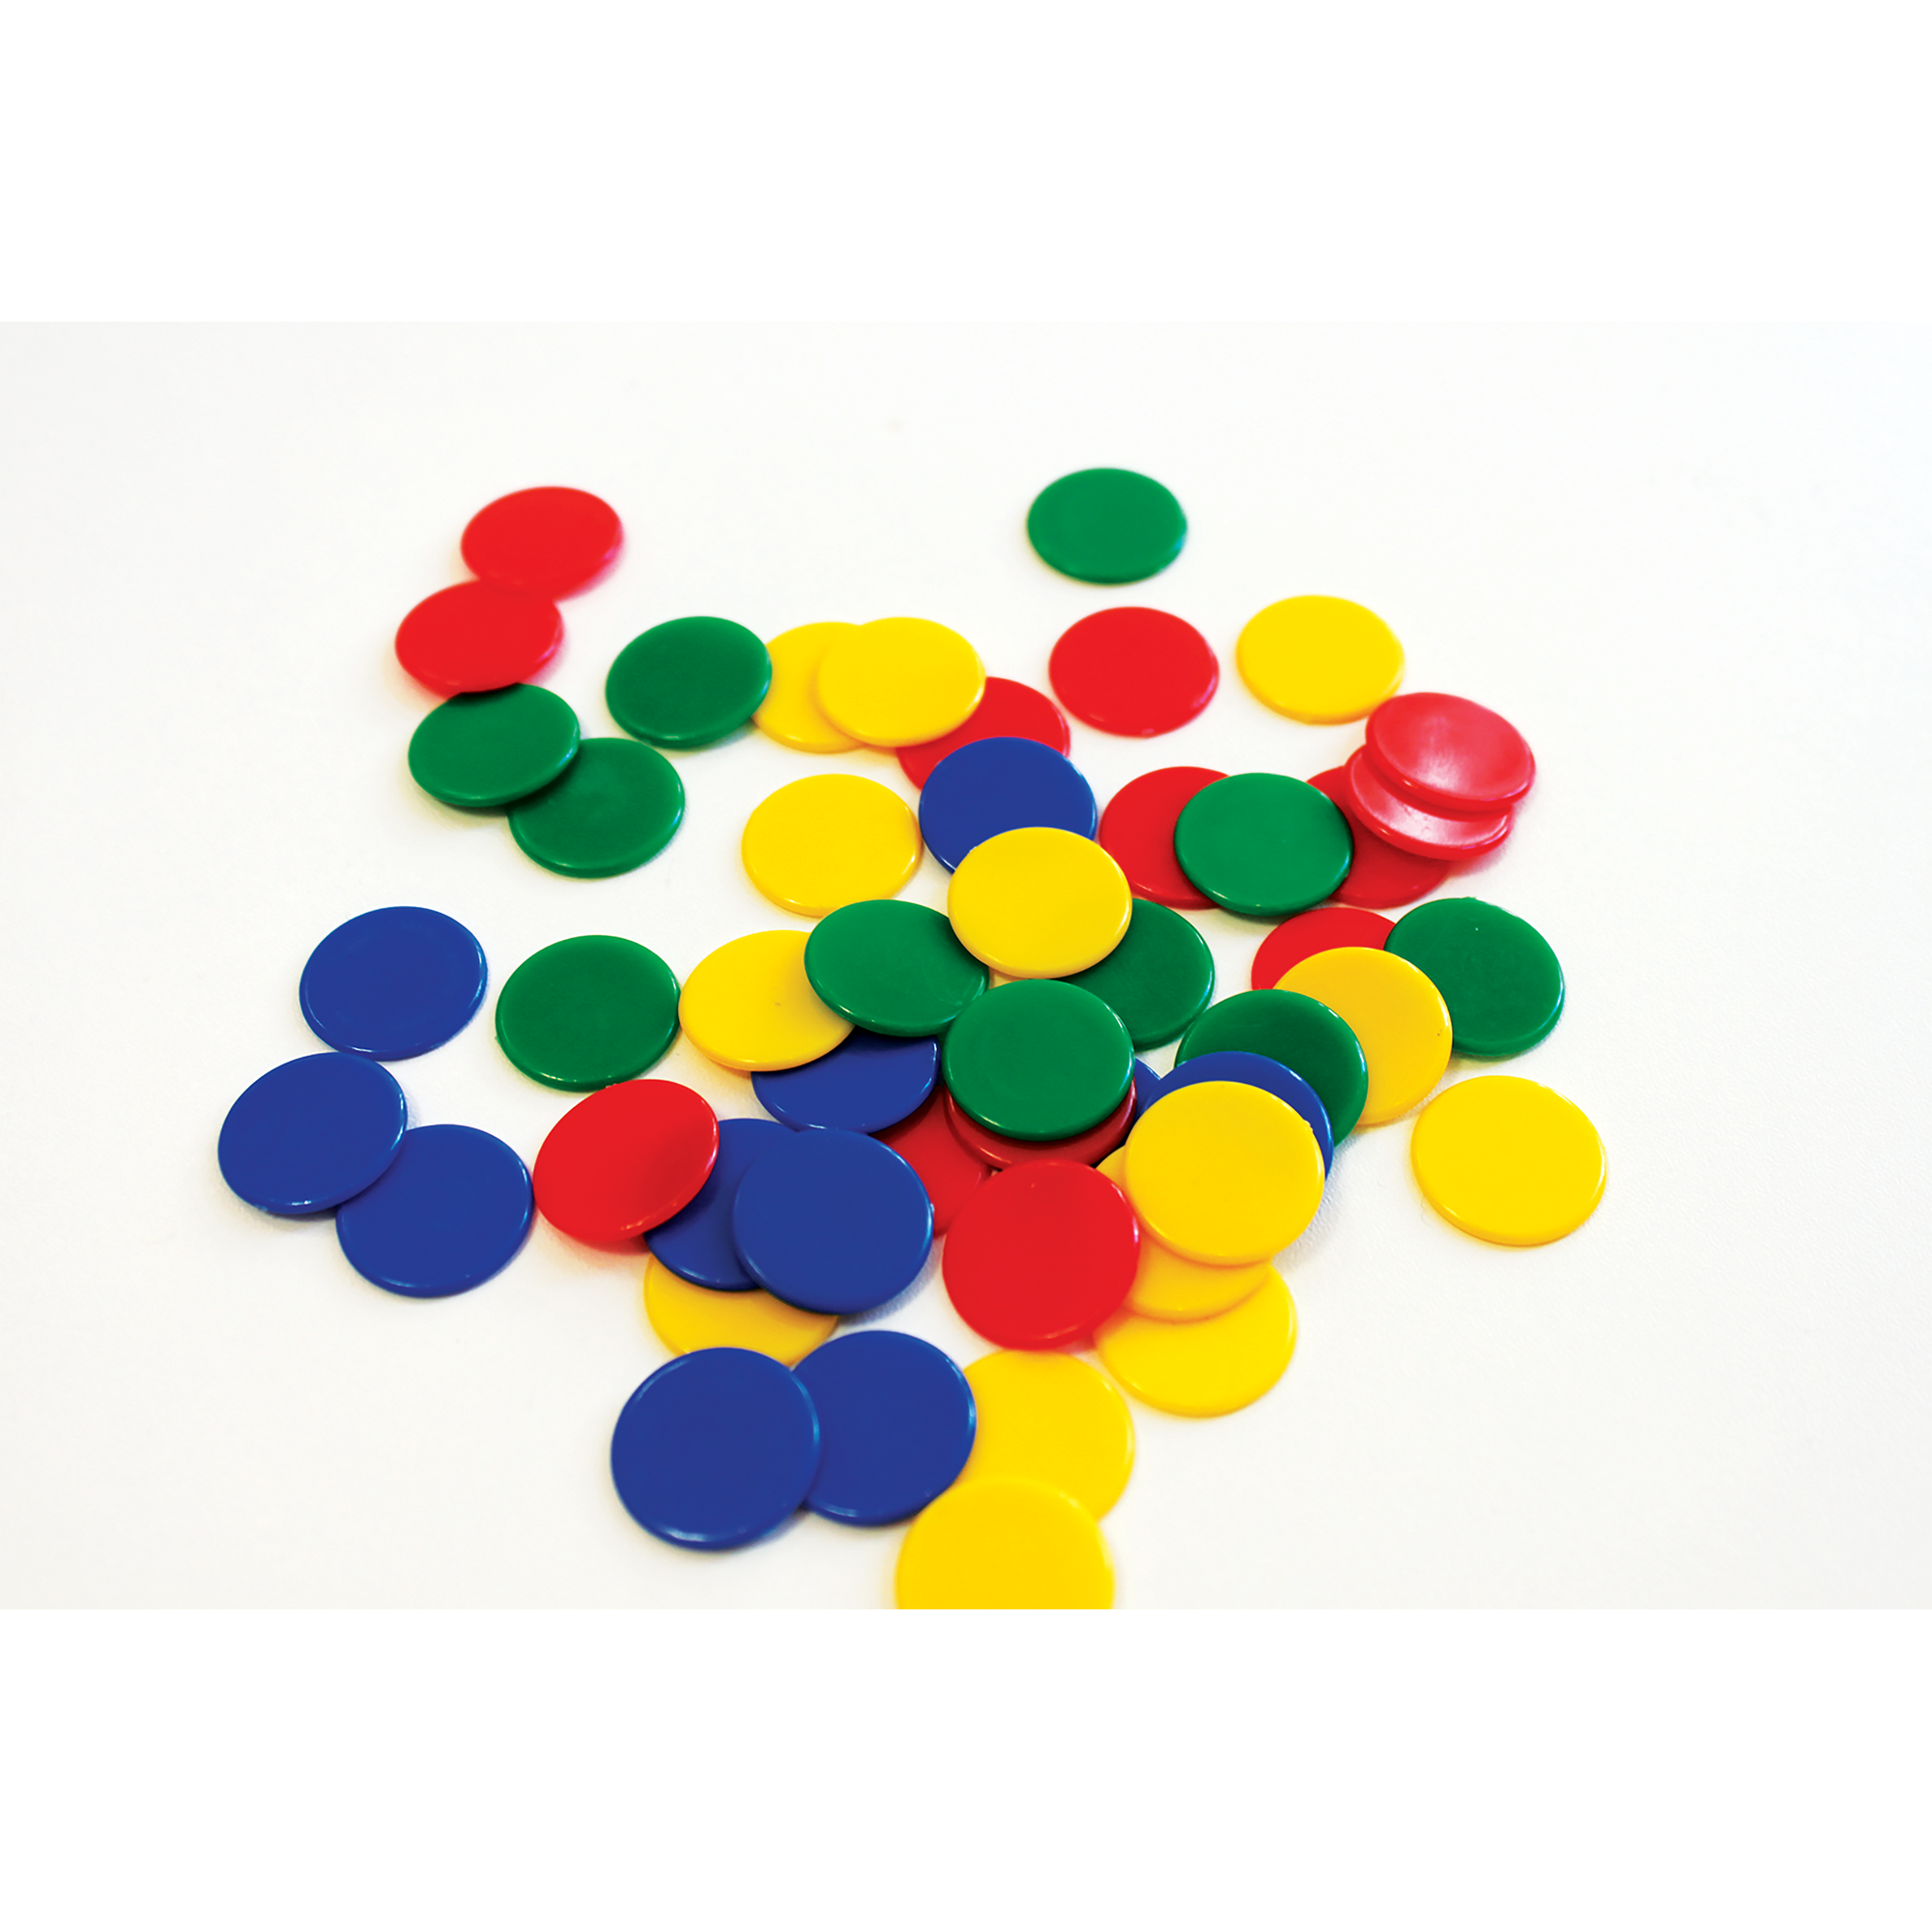 Hc1803877 Numicon Coloured Counters Pack Of 200 Findel International